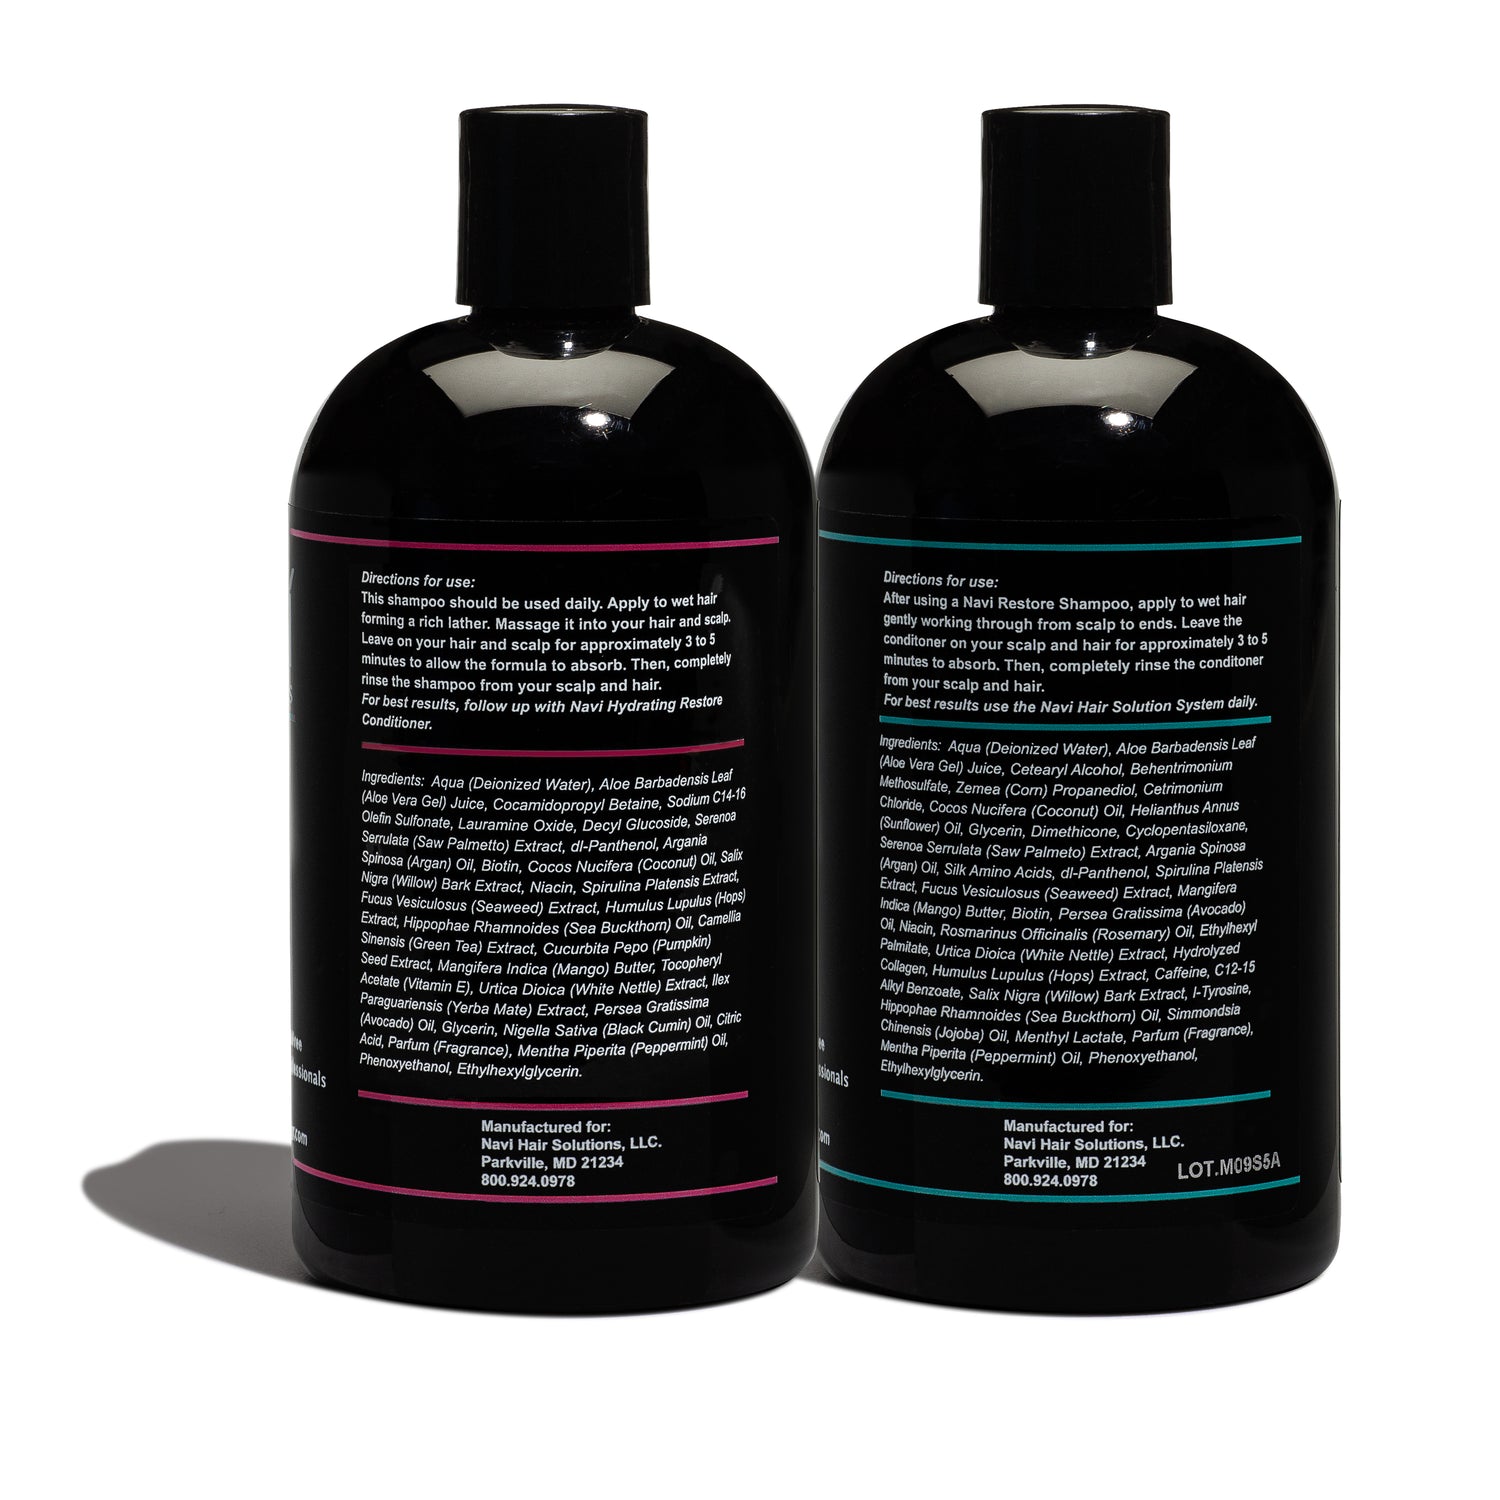 Daily Restore Shampoo & Conditioner Set DHT Blocking Ingredients to help regrow hair healthier and fuller